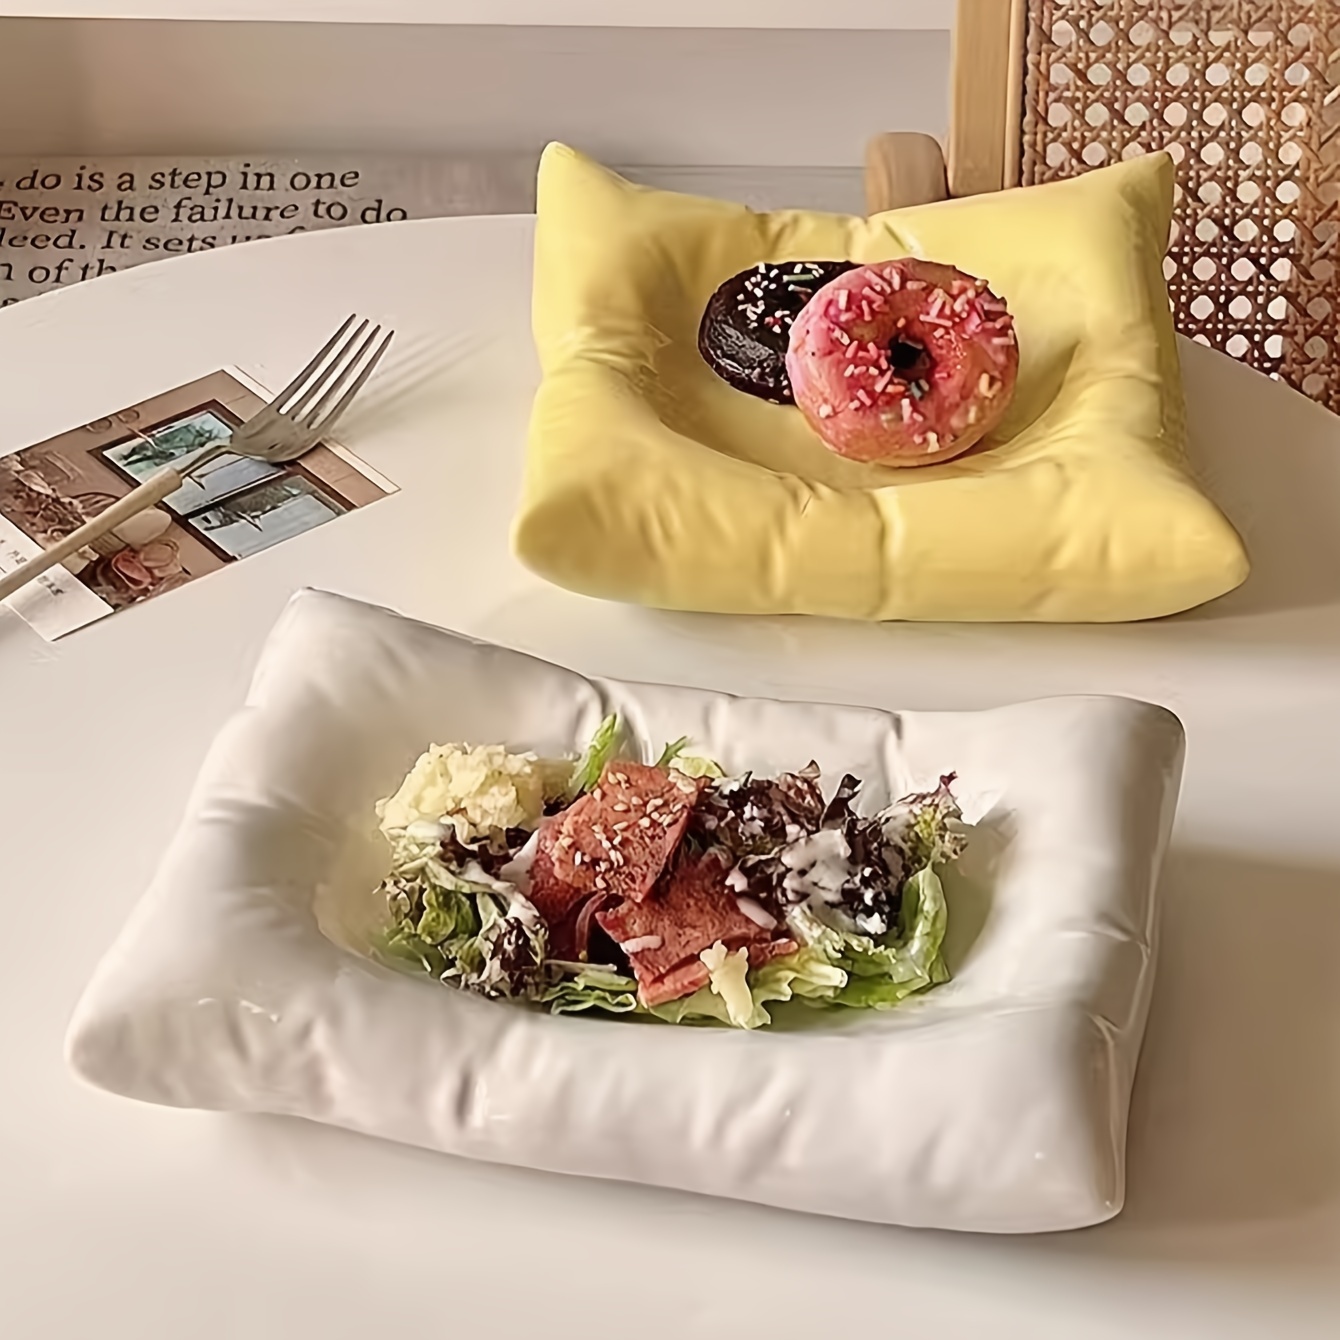 

Elegant Ceramic Salad Plate - Creative Pillow-shaped Dish For Snacks, Desserts & Noodles - Perfect For Home Or Restaurant Use